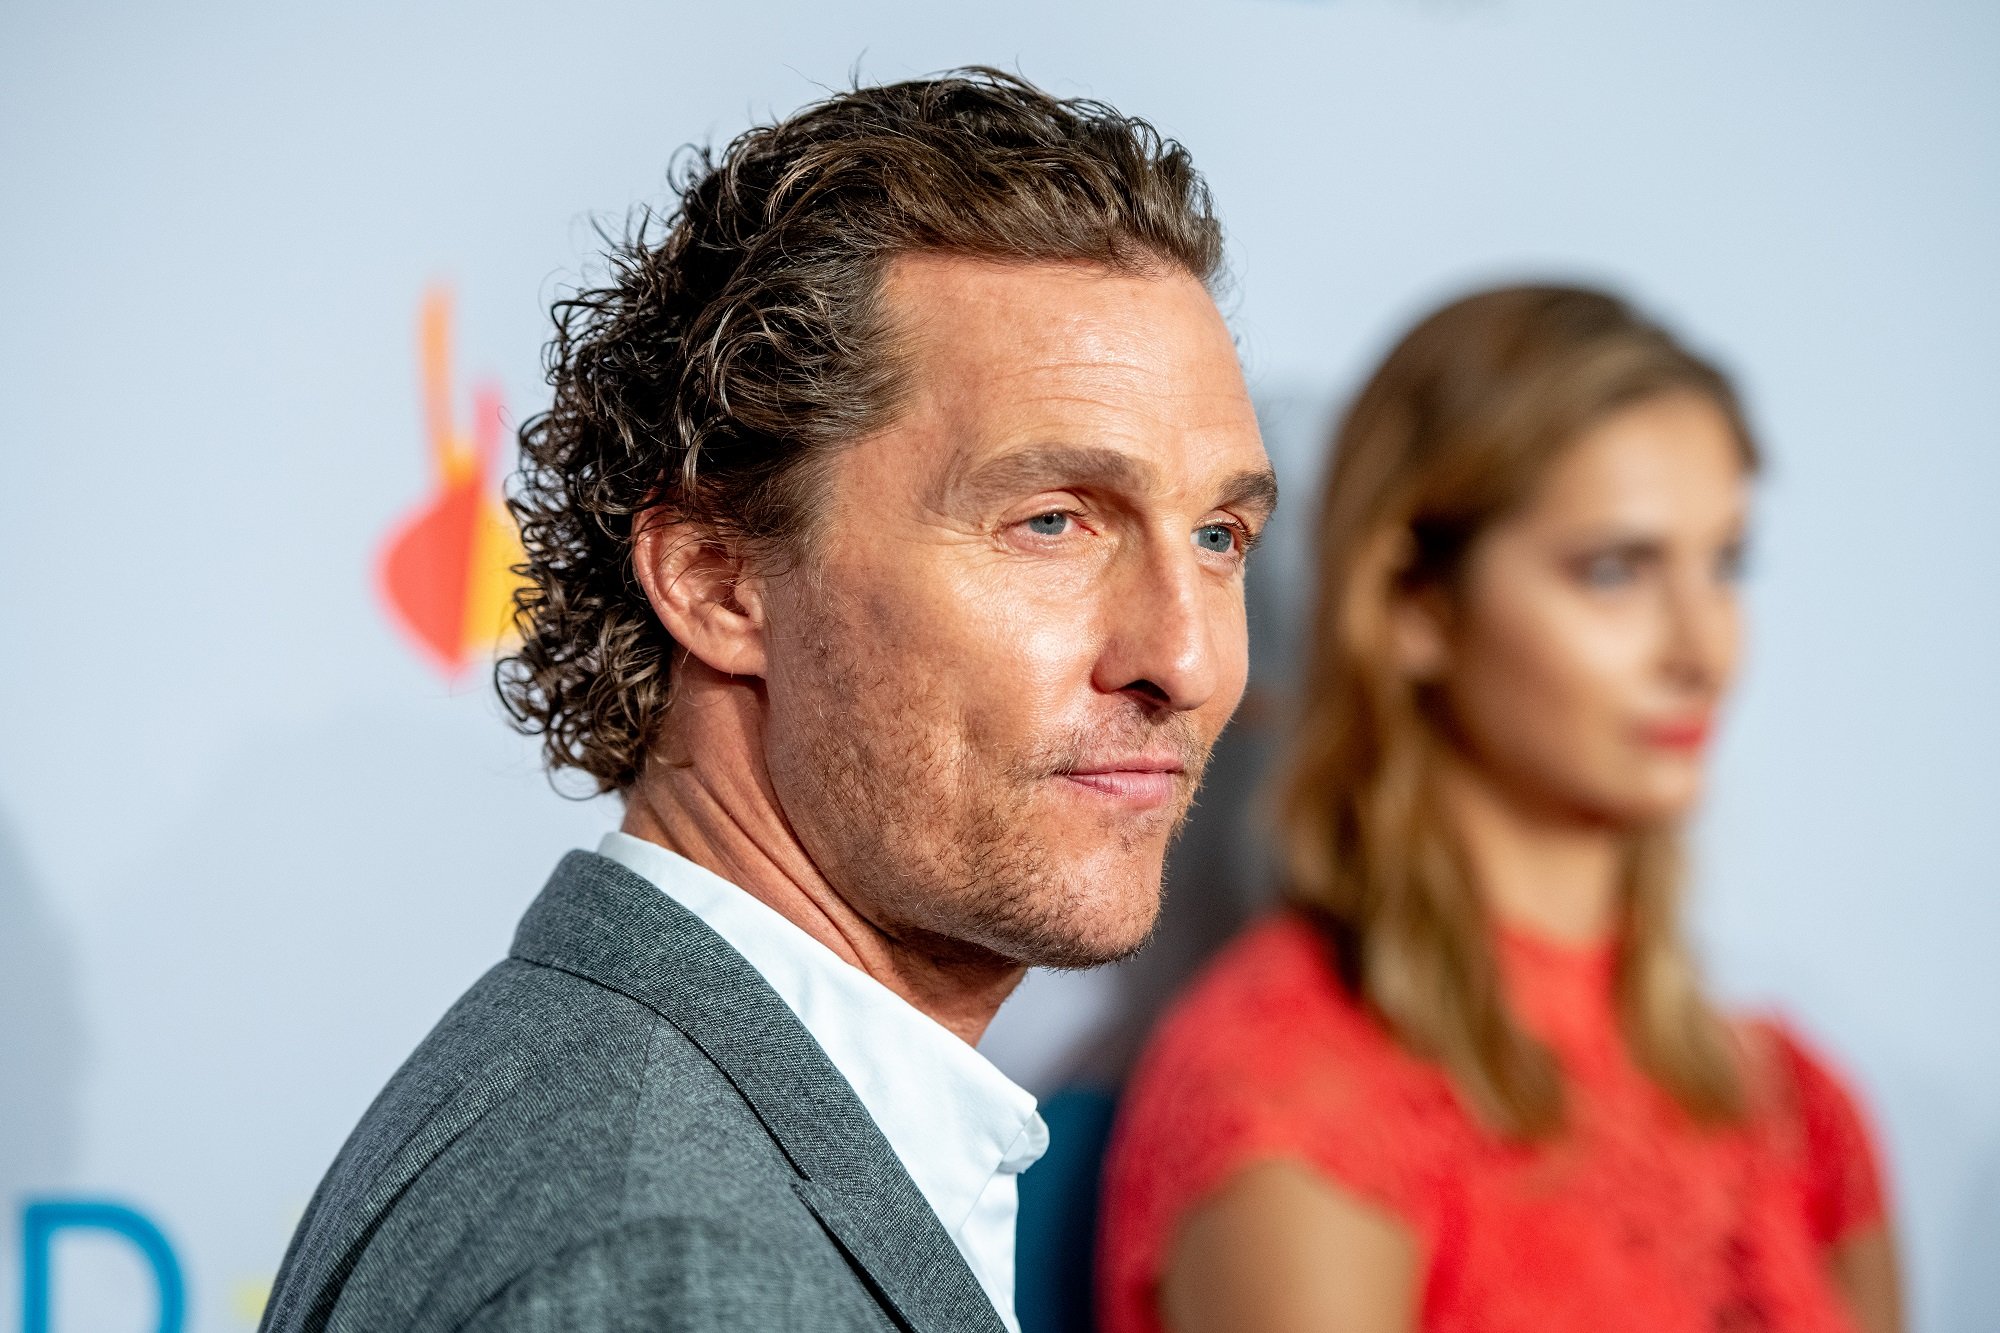 Matthew Mcconaughey Said His Father Once Told Him The Most Beautiful Words Ive Ever Heard 